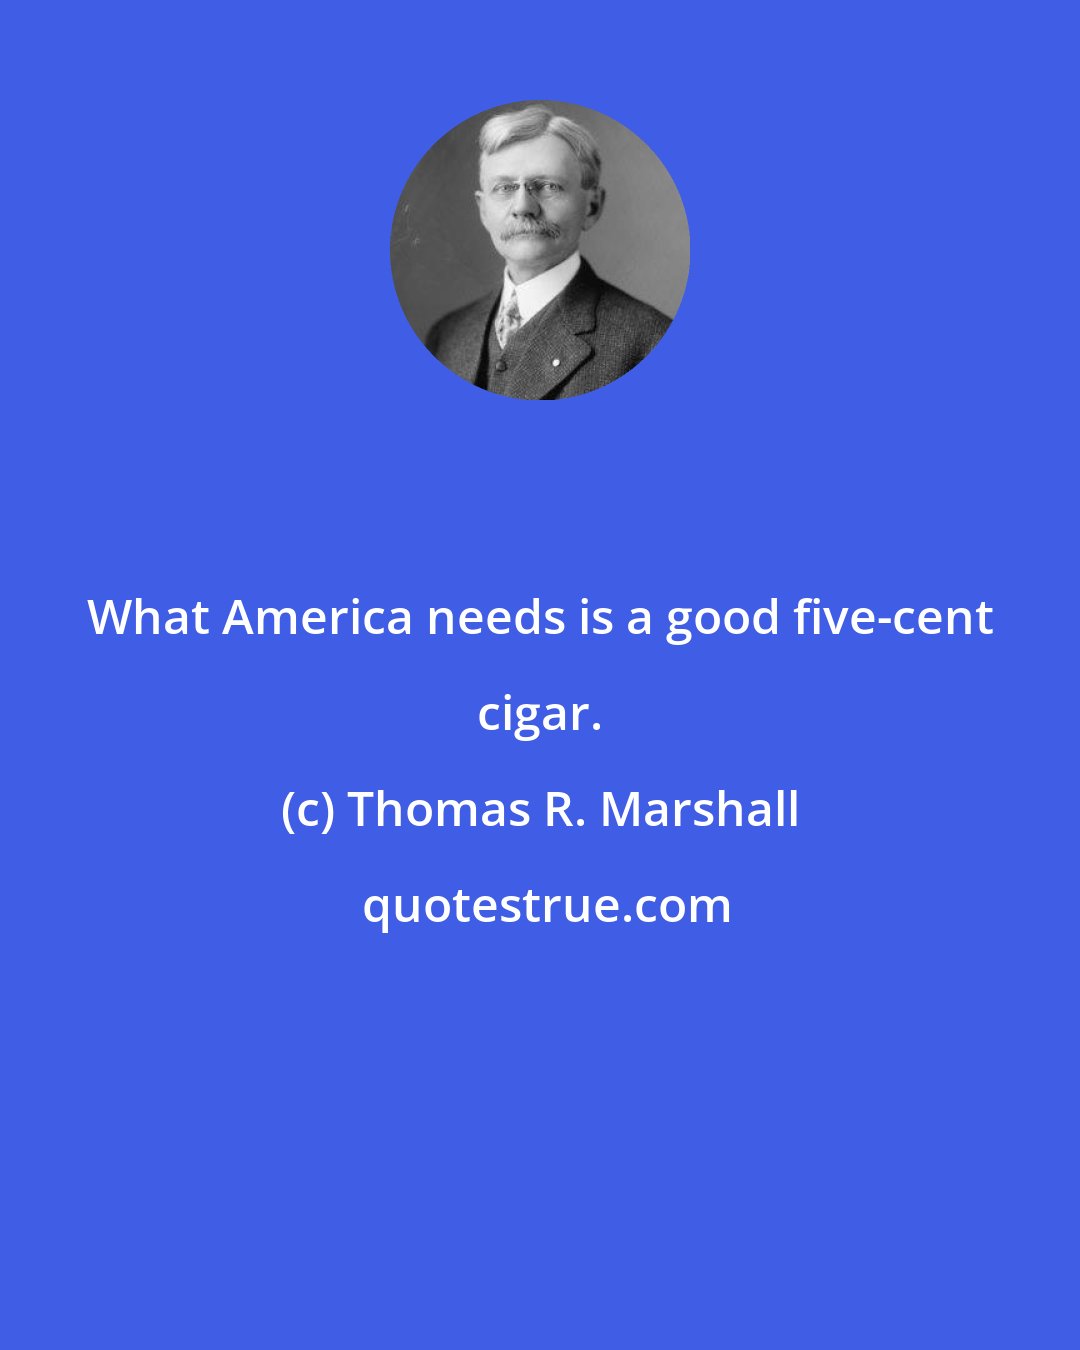 Thomas R. Marshall: What America needs is a good five-cent cigar.